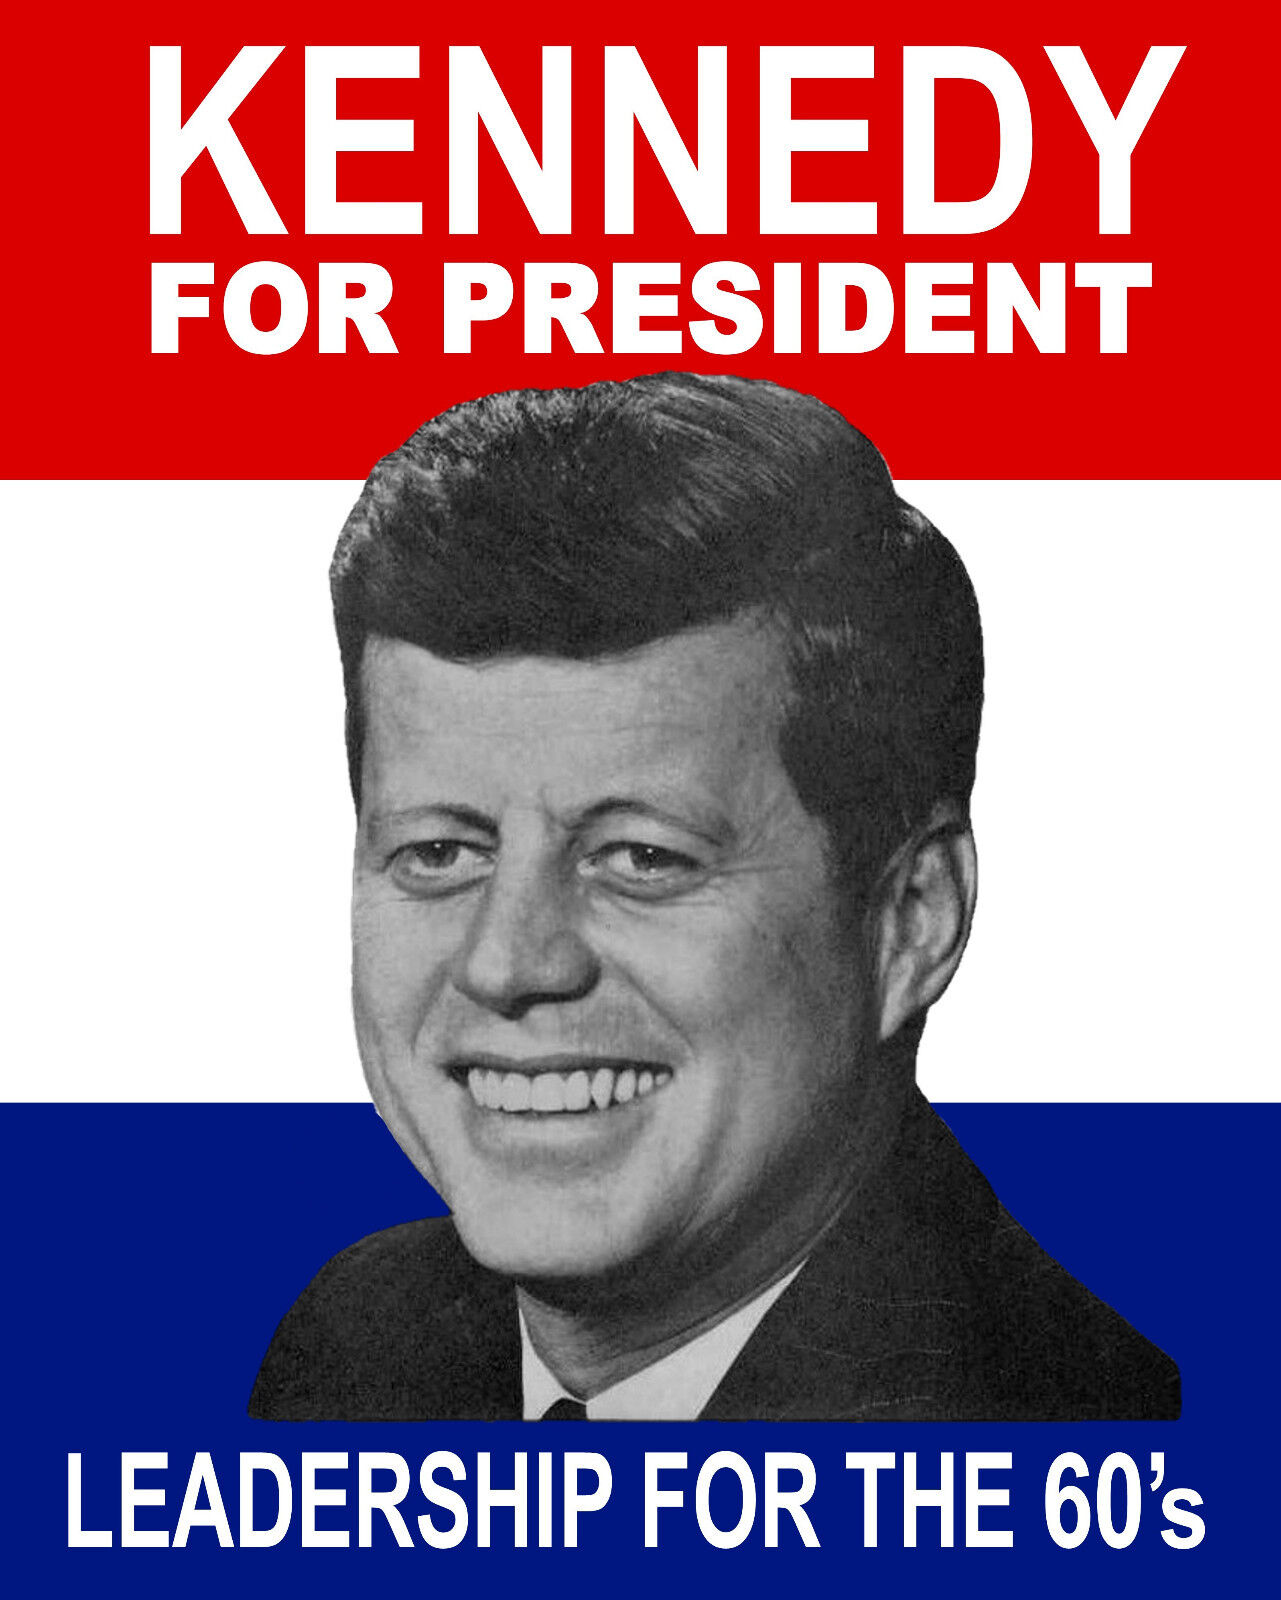 John F. Kennedy JFK 1960 For President Campaign 8 x 10 Poster Photo Photograph 